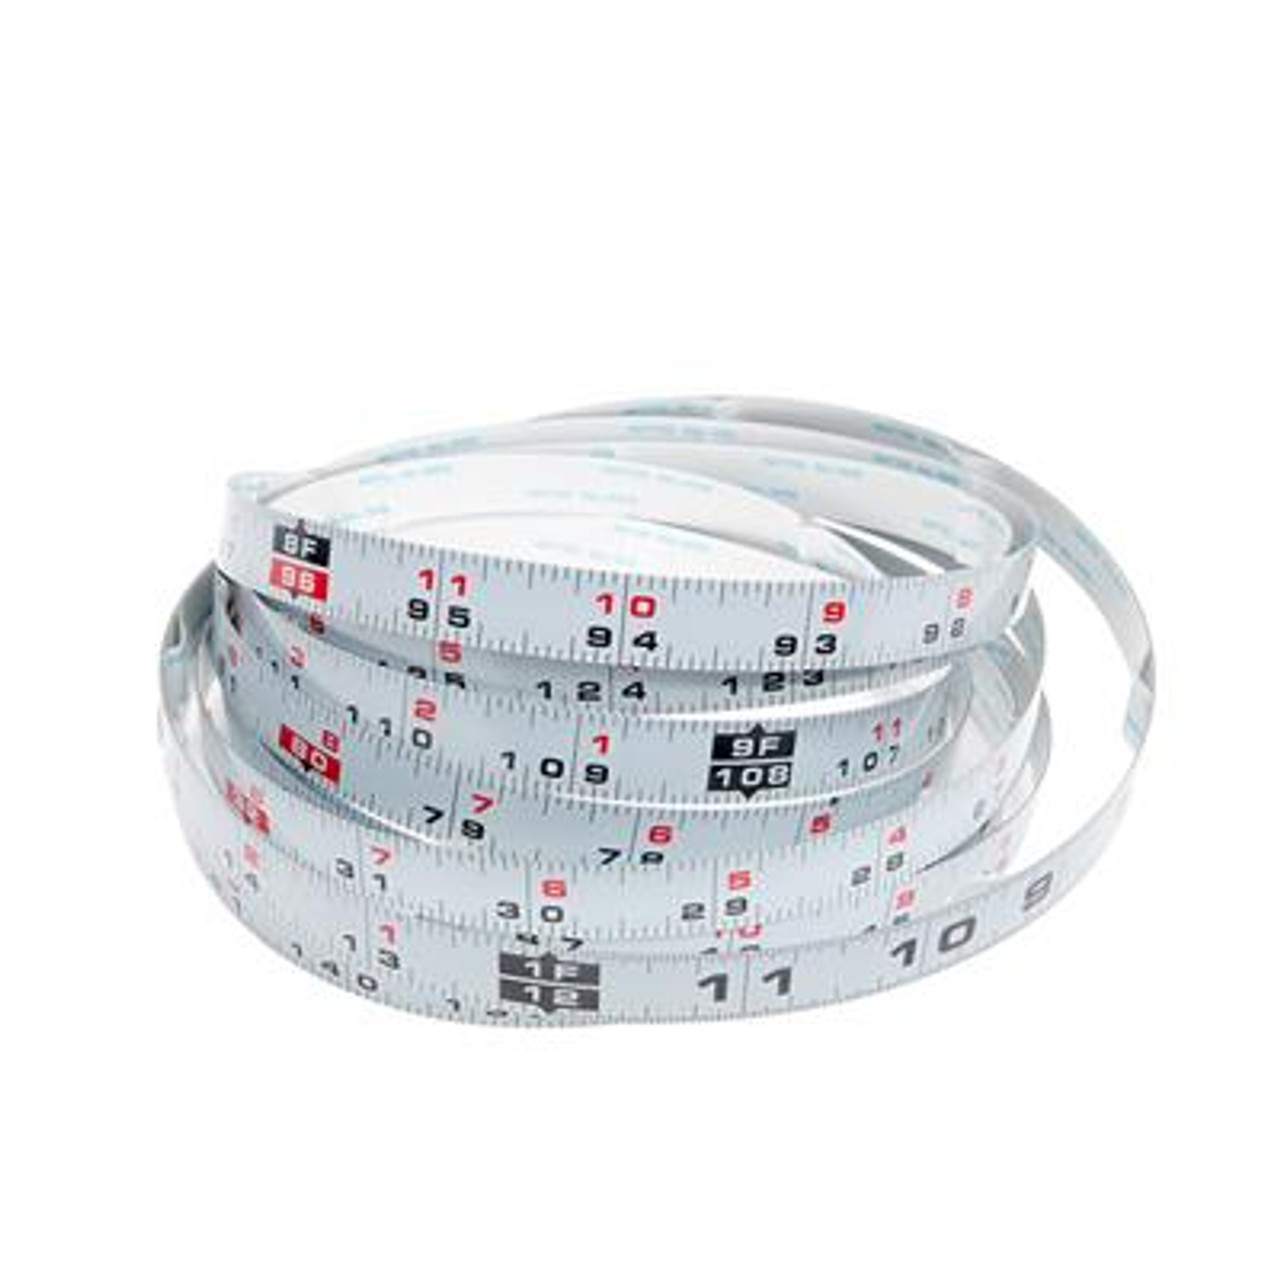 Kreg 12' Self-Adhesive Measuring Tape - Right to Left Reading (KMS7723)